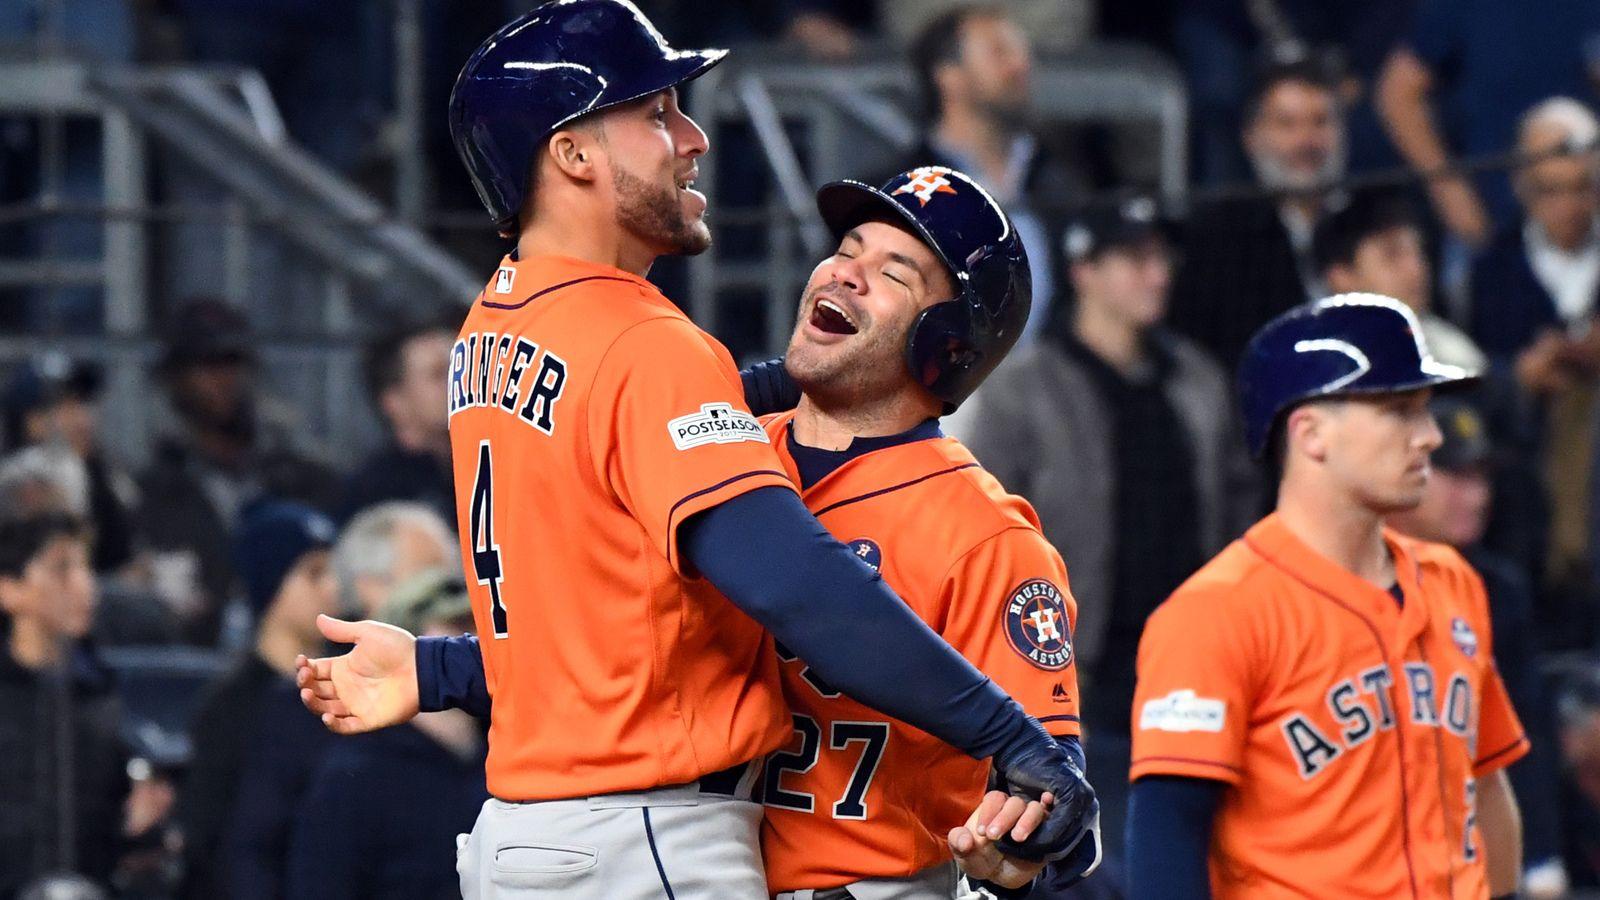 George Springer: Off day will be 'huge' for us